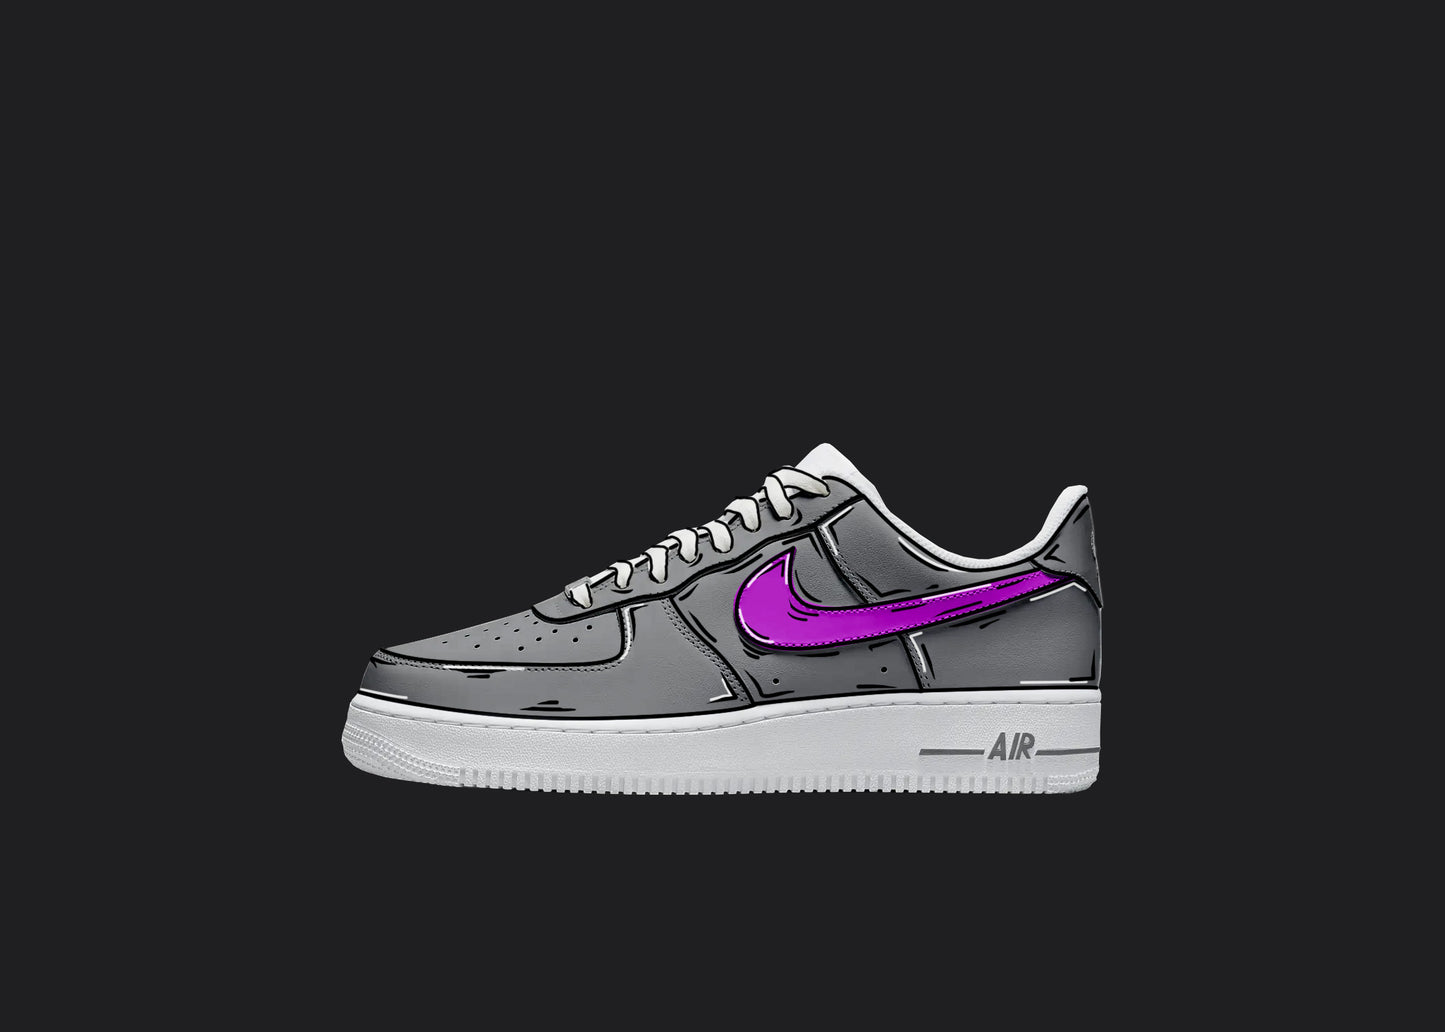 white nike air force 1 low model side view on a plain black background. the sneakers feature a custom cartoon design in gray and pink